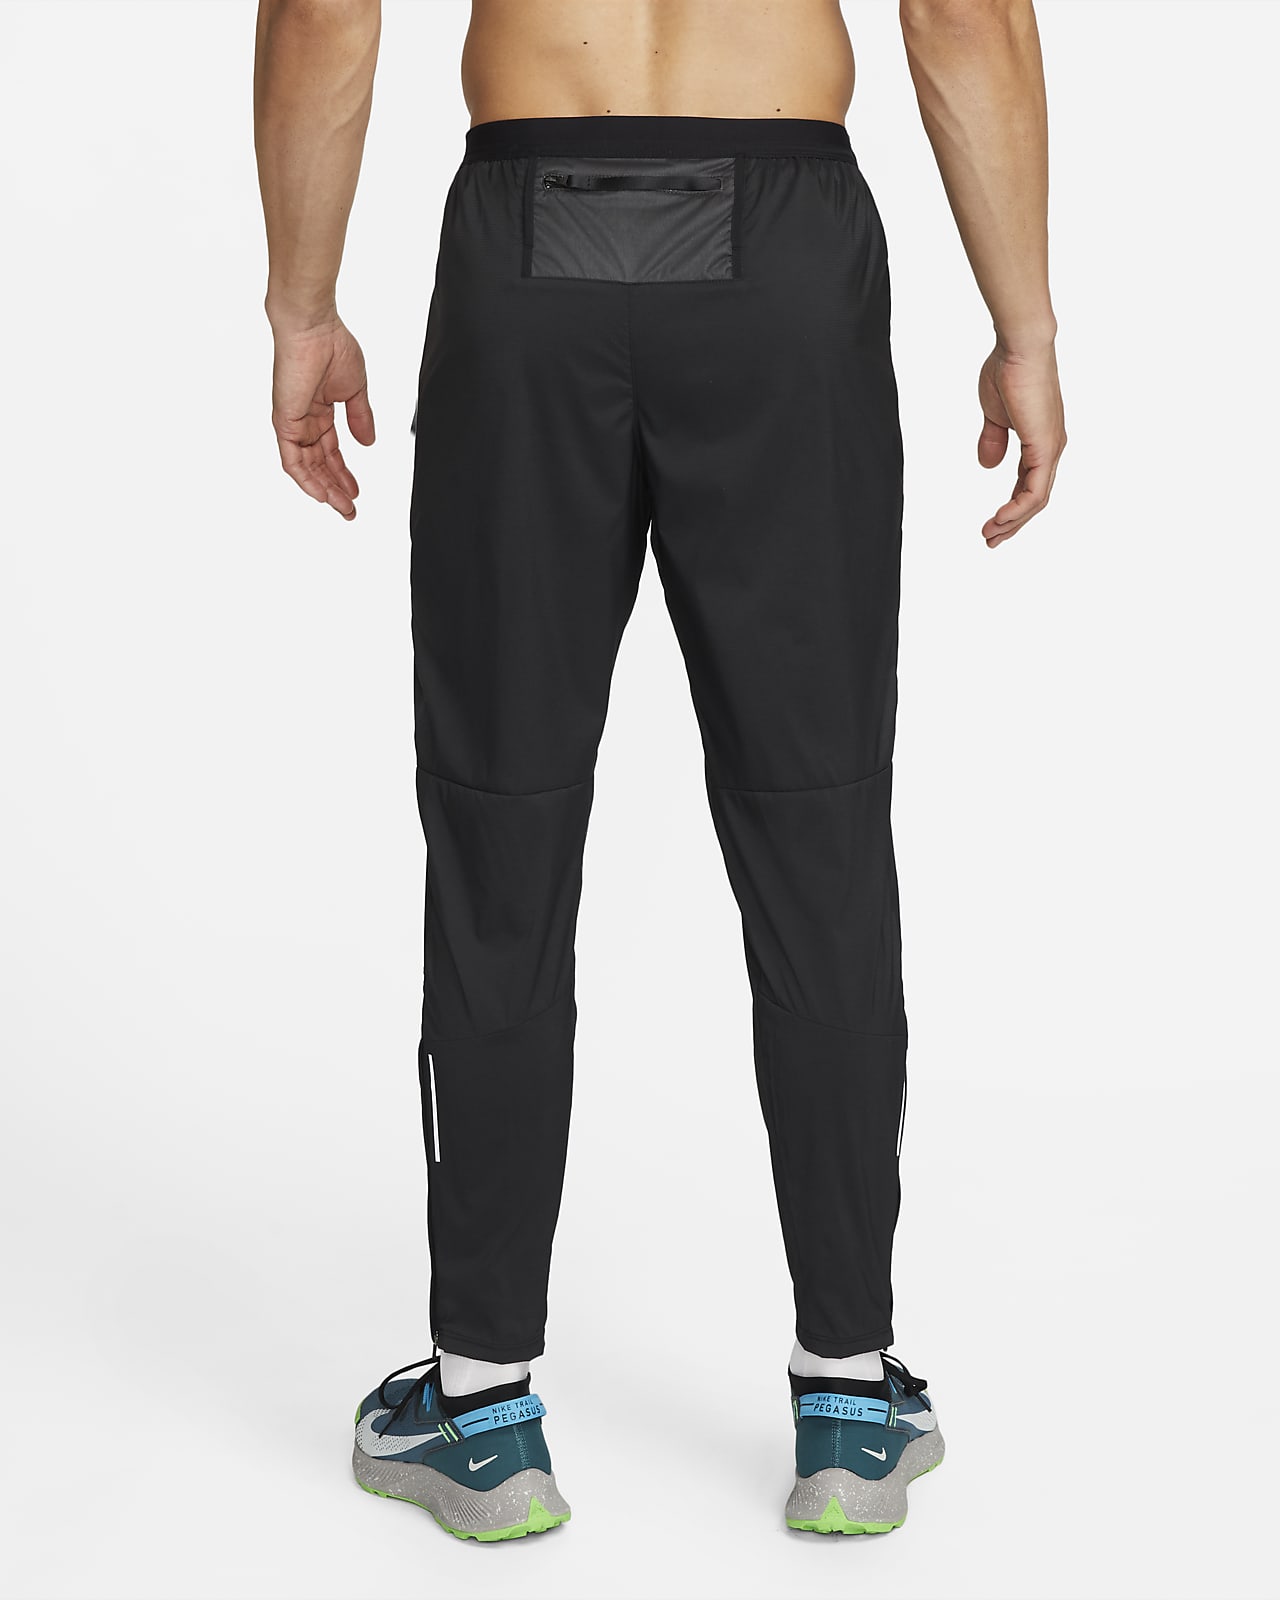 Nike Running Run Division Phenom Elite Flash reflective joggers in navy -  ShopStyle Trousers